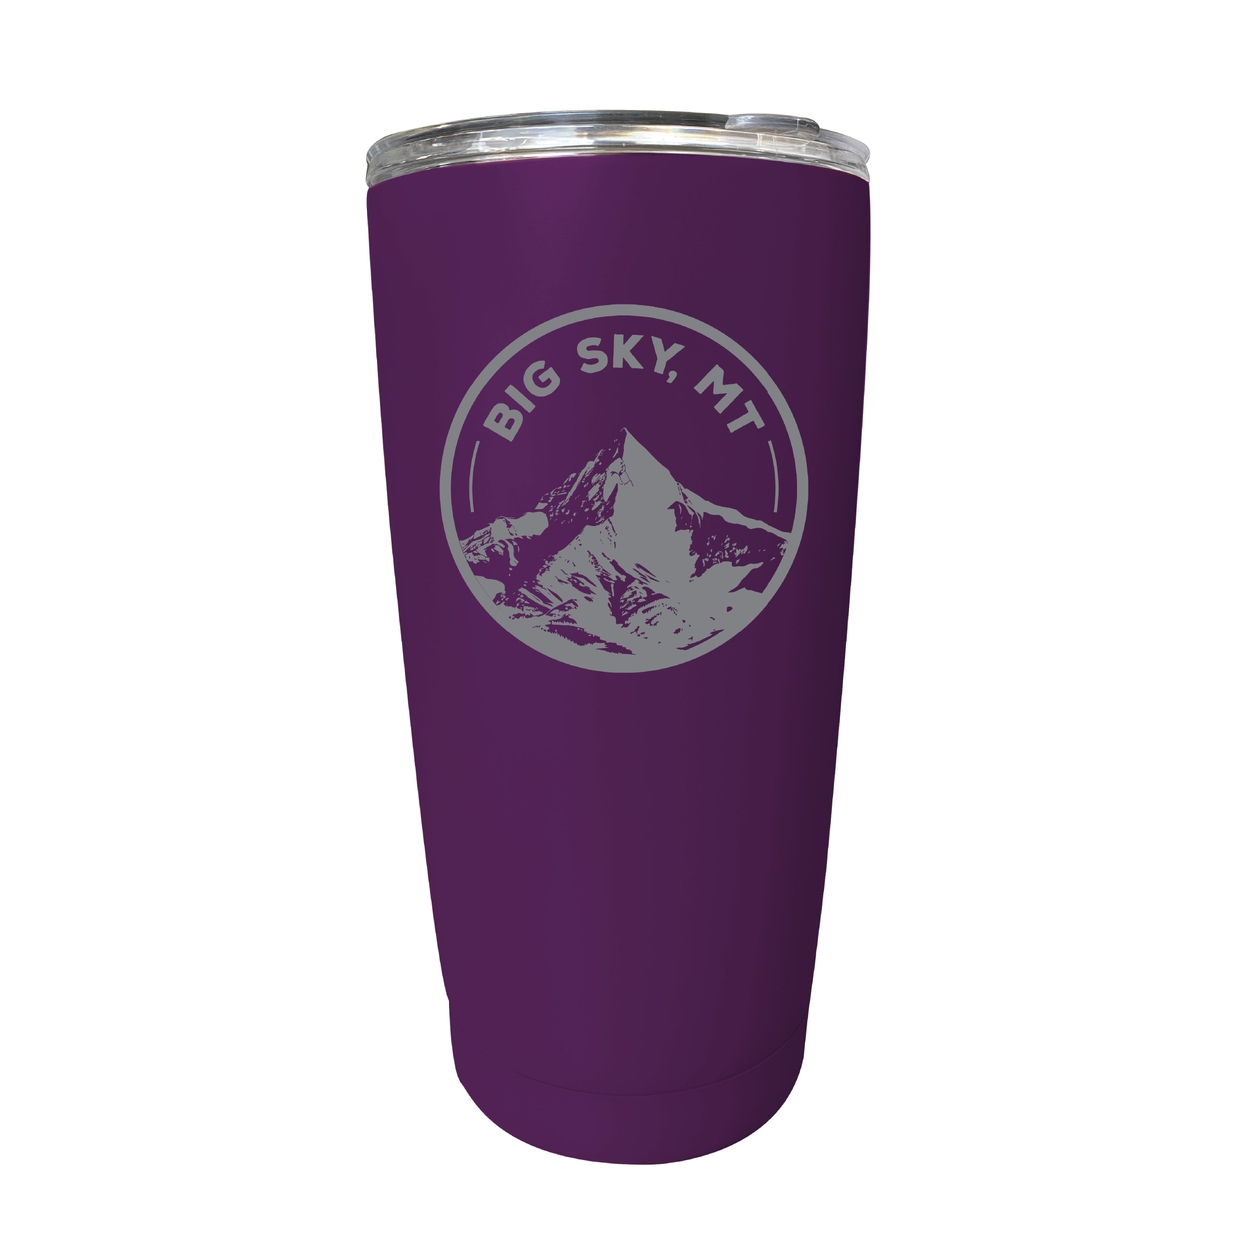 Big Sky Montana Souvenir 16 Oz Engraved Stainless Steel Insulated Tumbler - Navy,,2-Pack